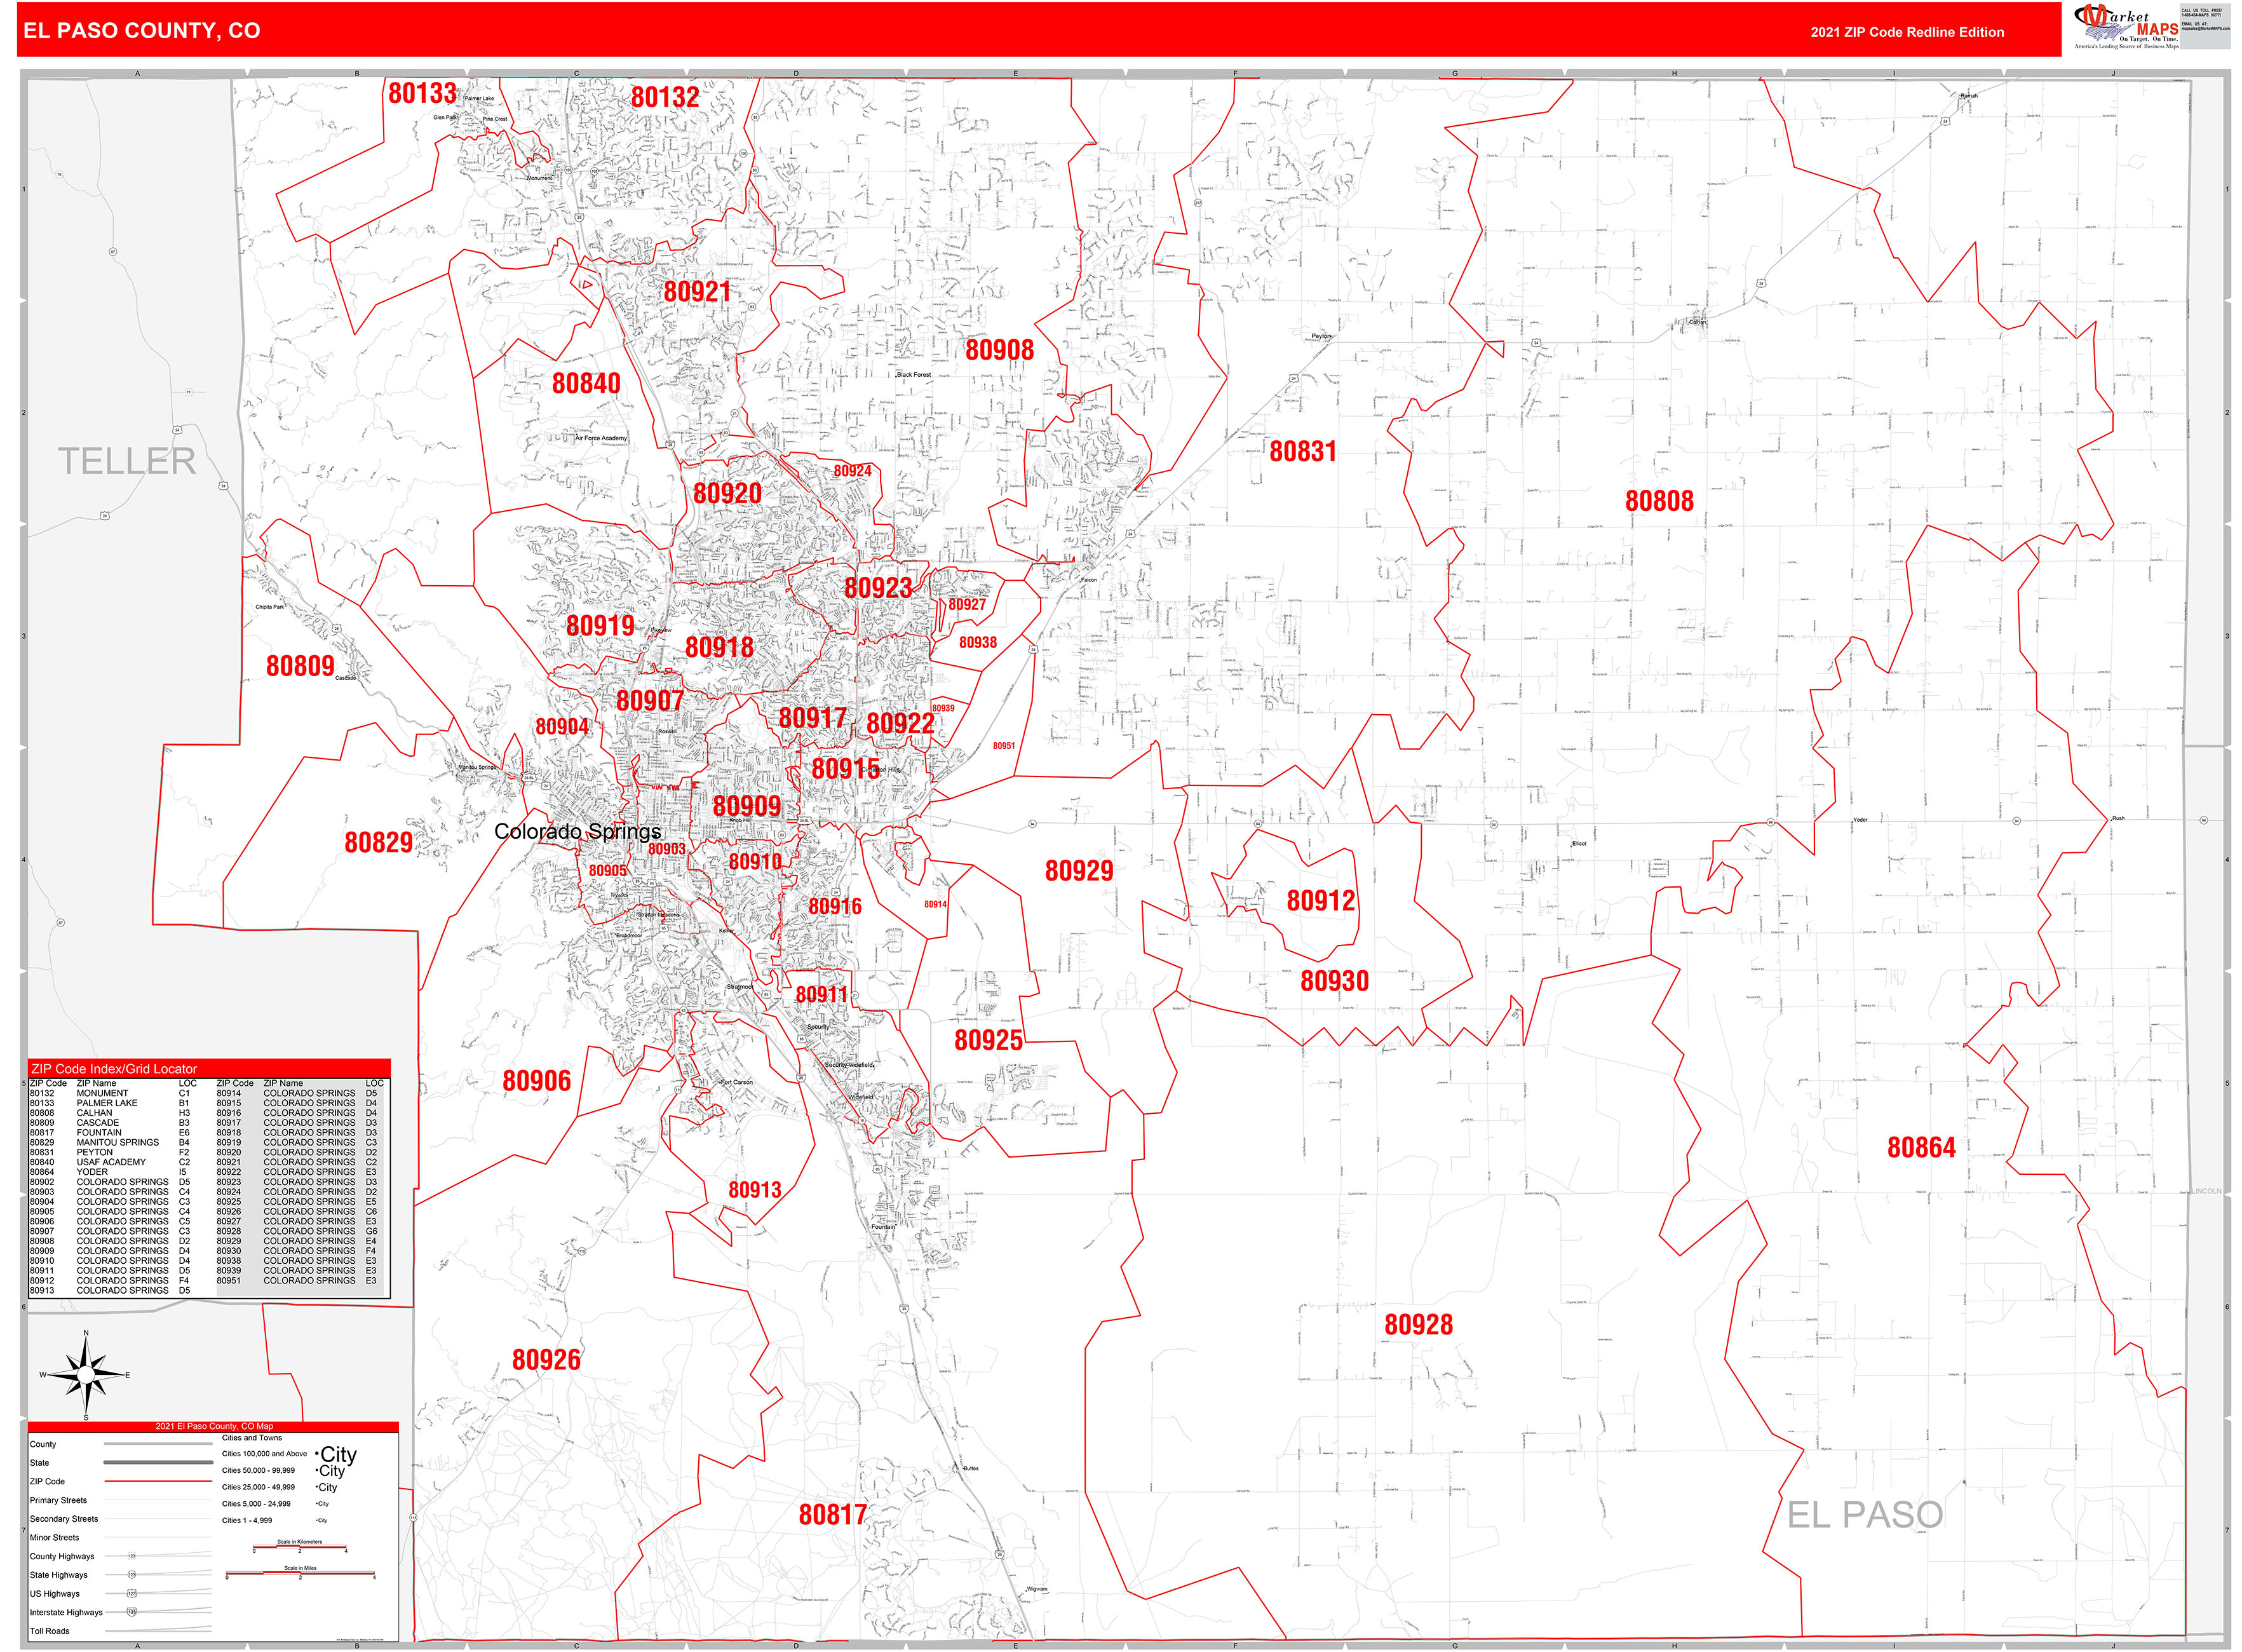 El Paso County Co Zip Code Wall Map Red Line Style By Marketmaps Mapsales 9501